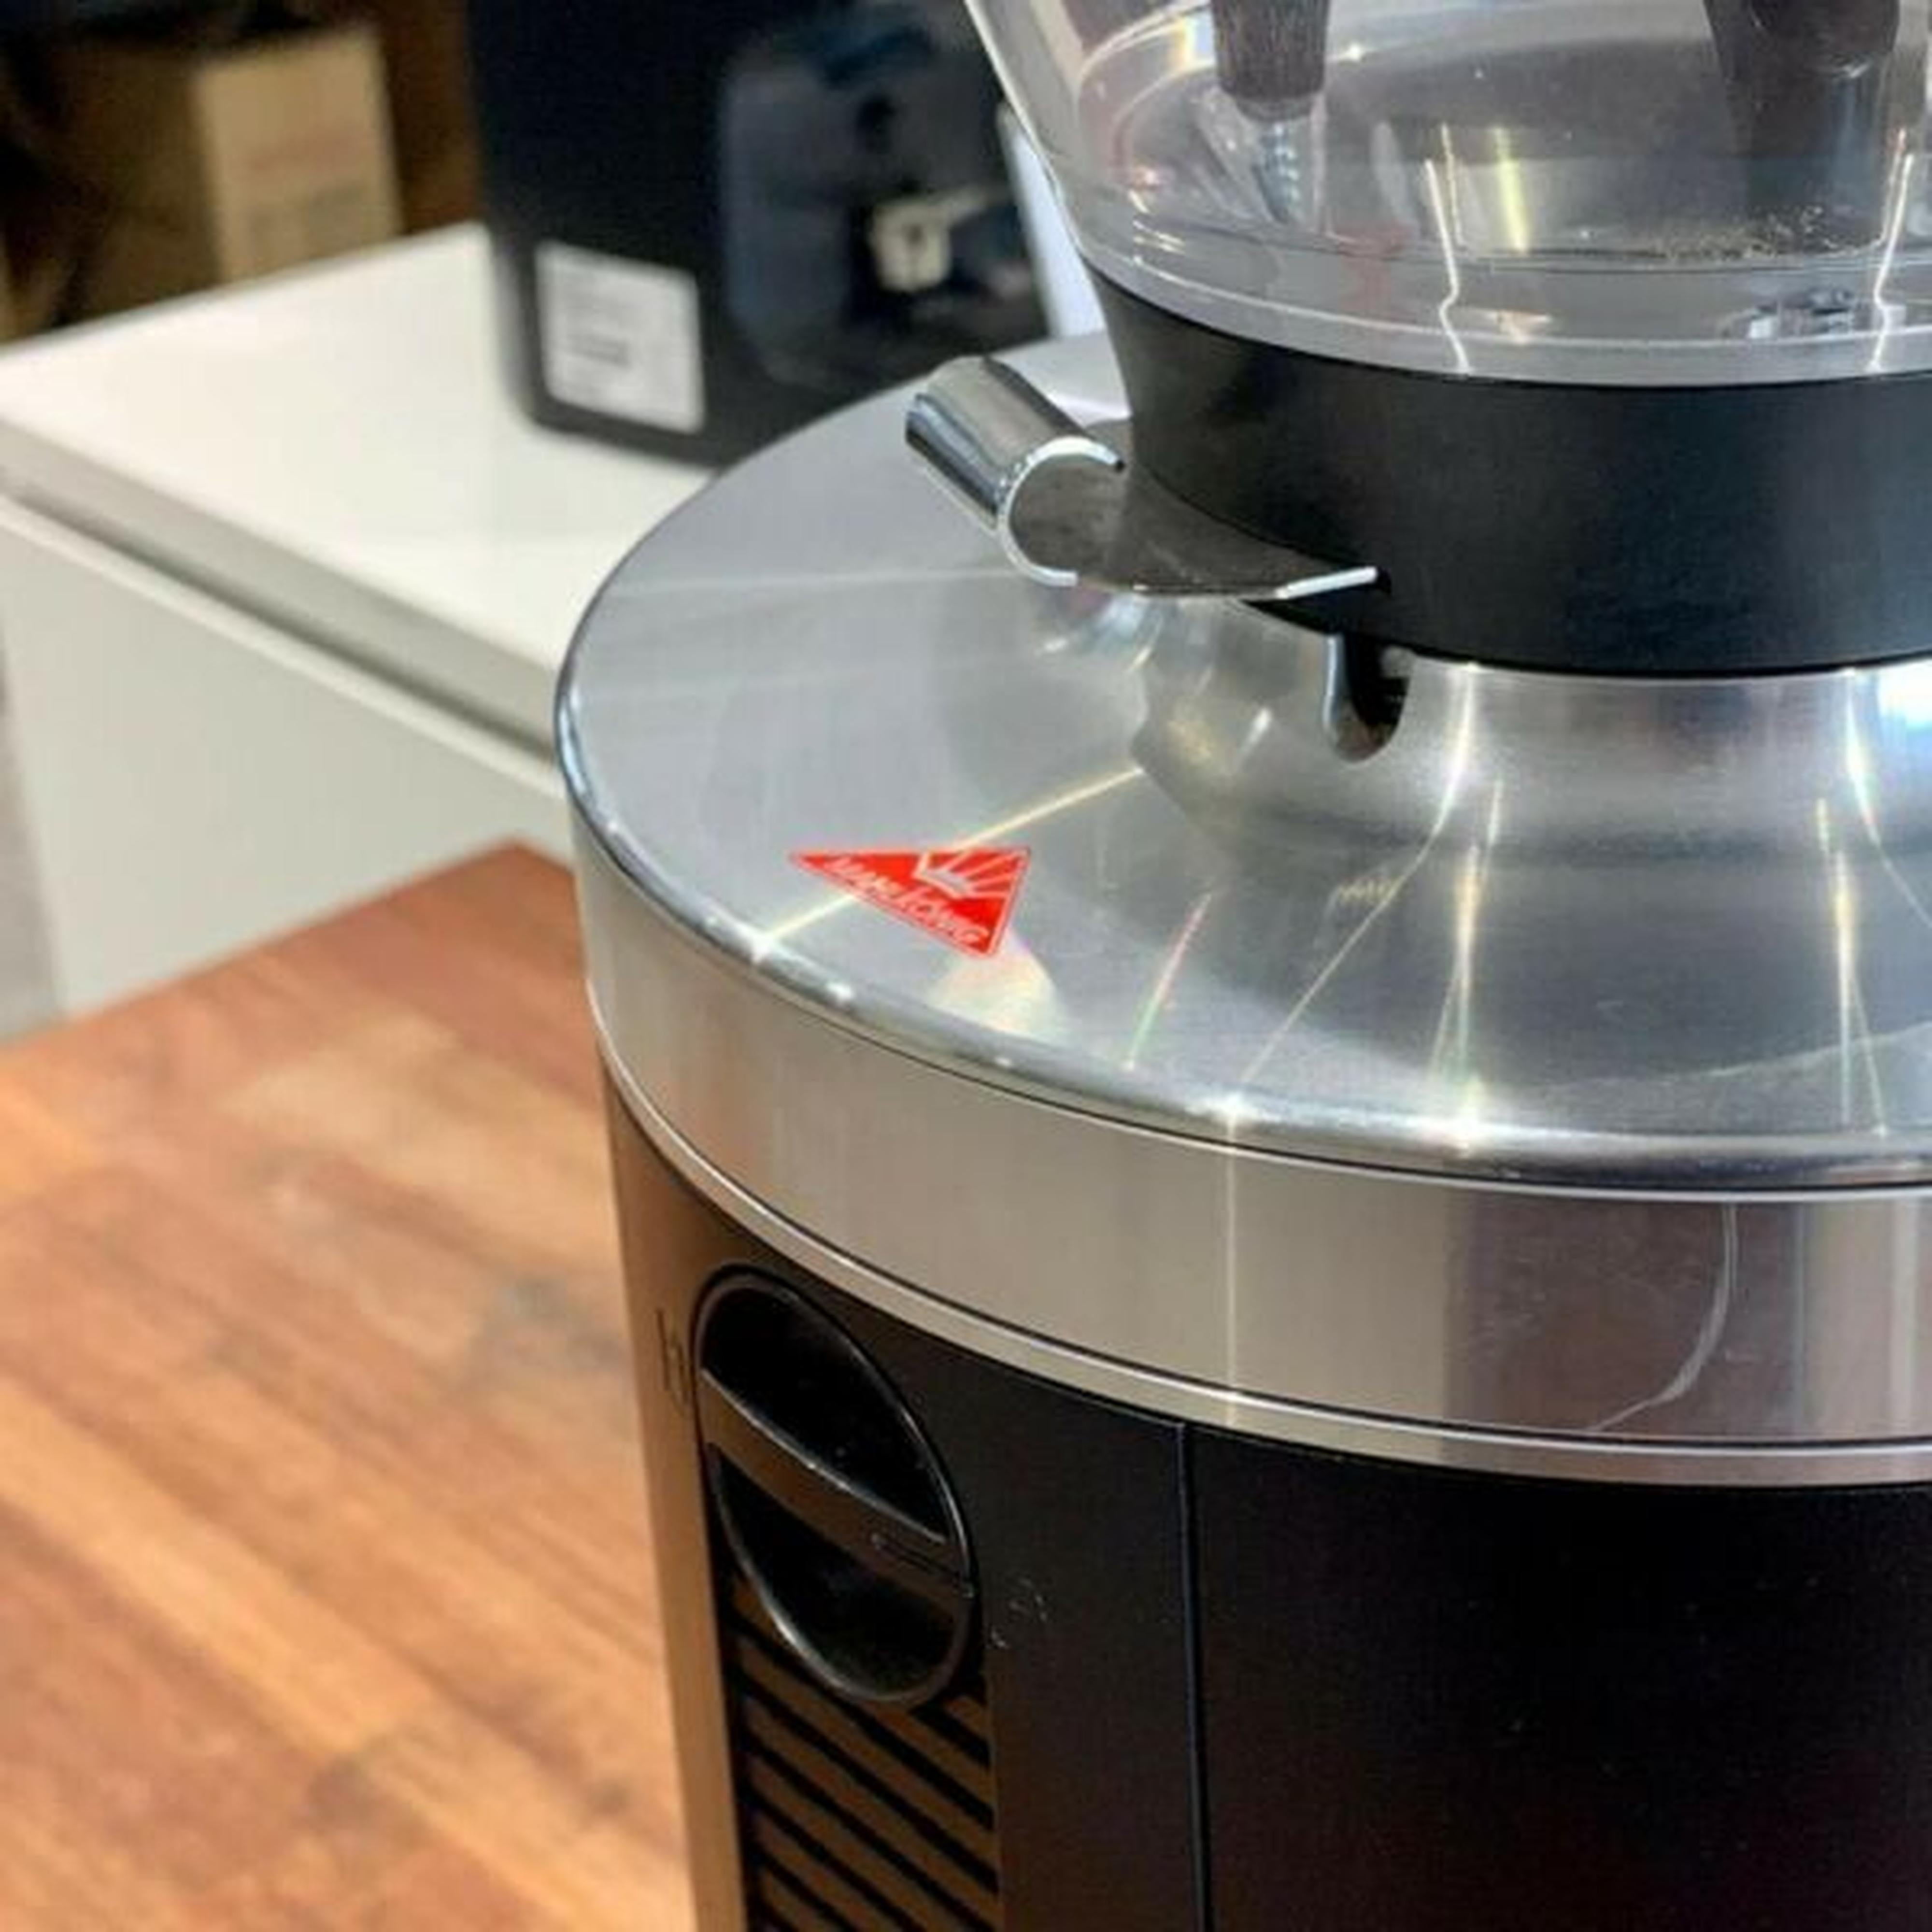 Demo E65 Mahlkoning E65 On Demand Commercial Coffee Bean Grinder